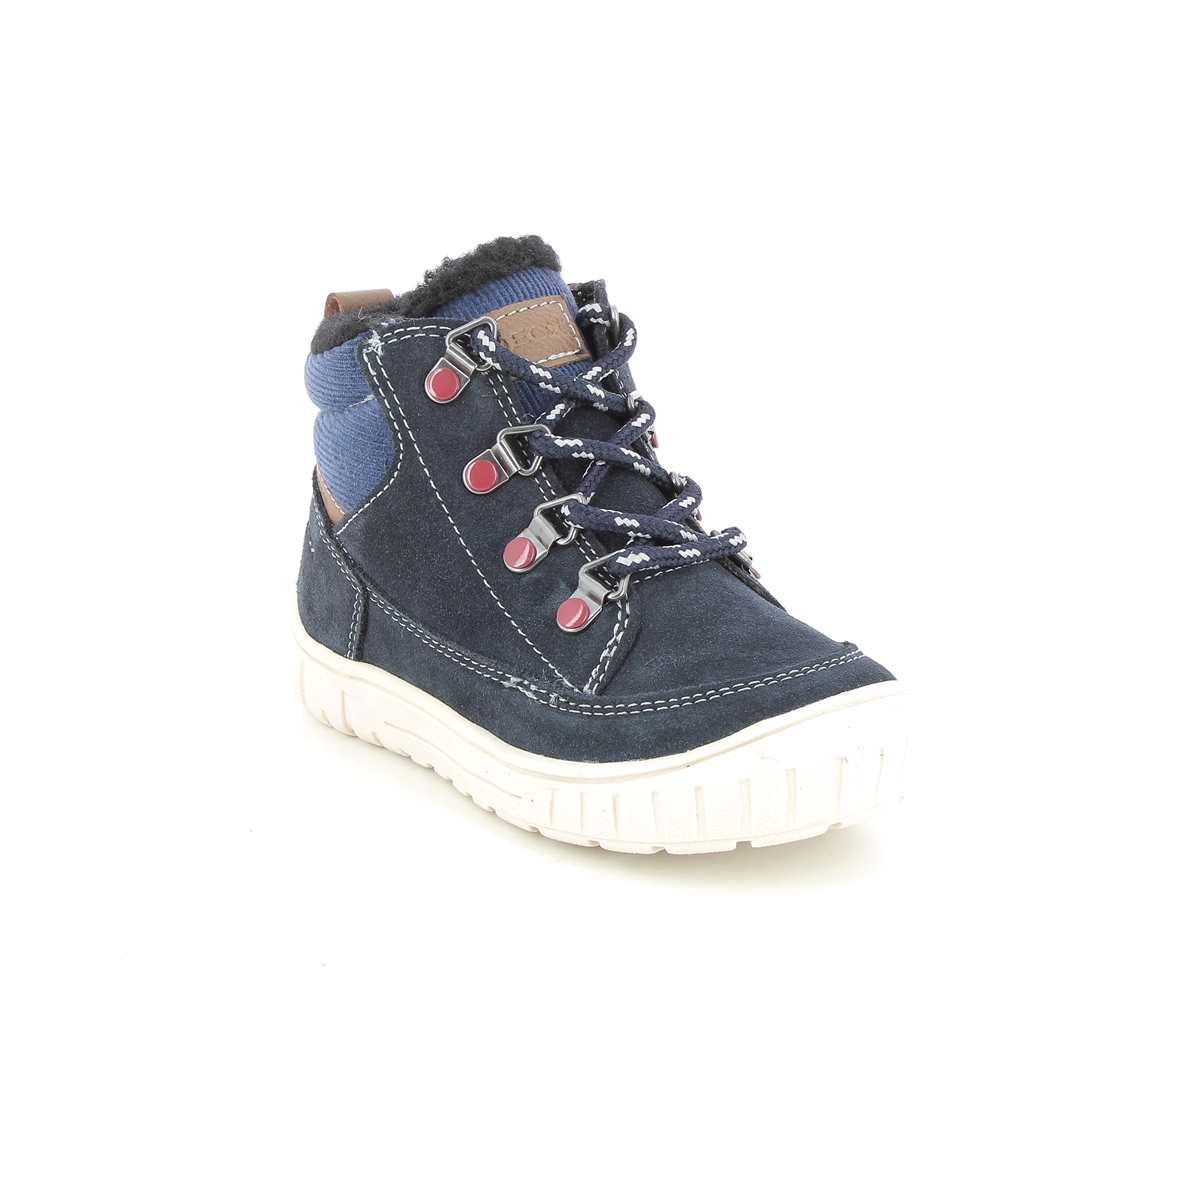 Geox Omar Boy Tex Navy Suede Kids Toddler Boys Boots B162DA-C0735 in a Plain Leather in Size 25